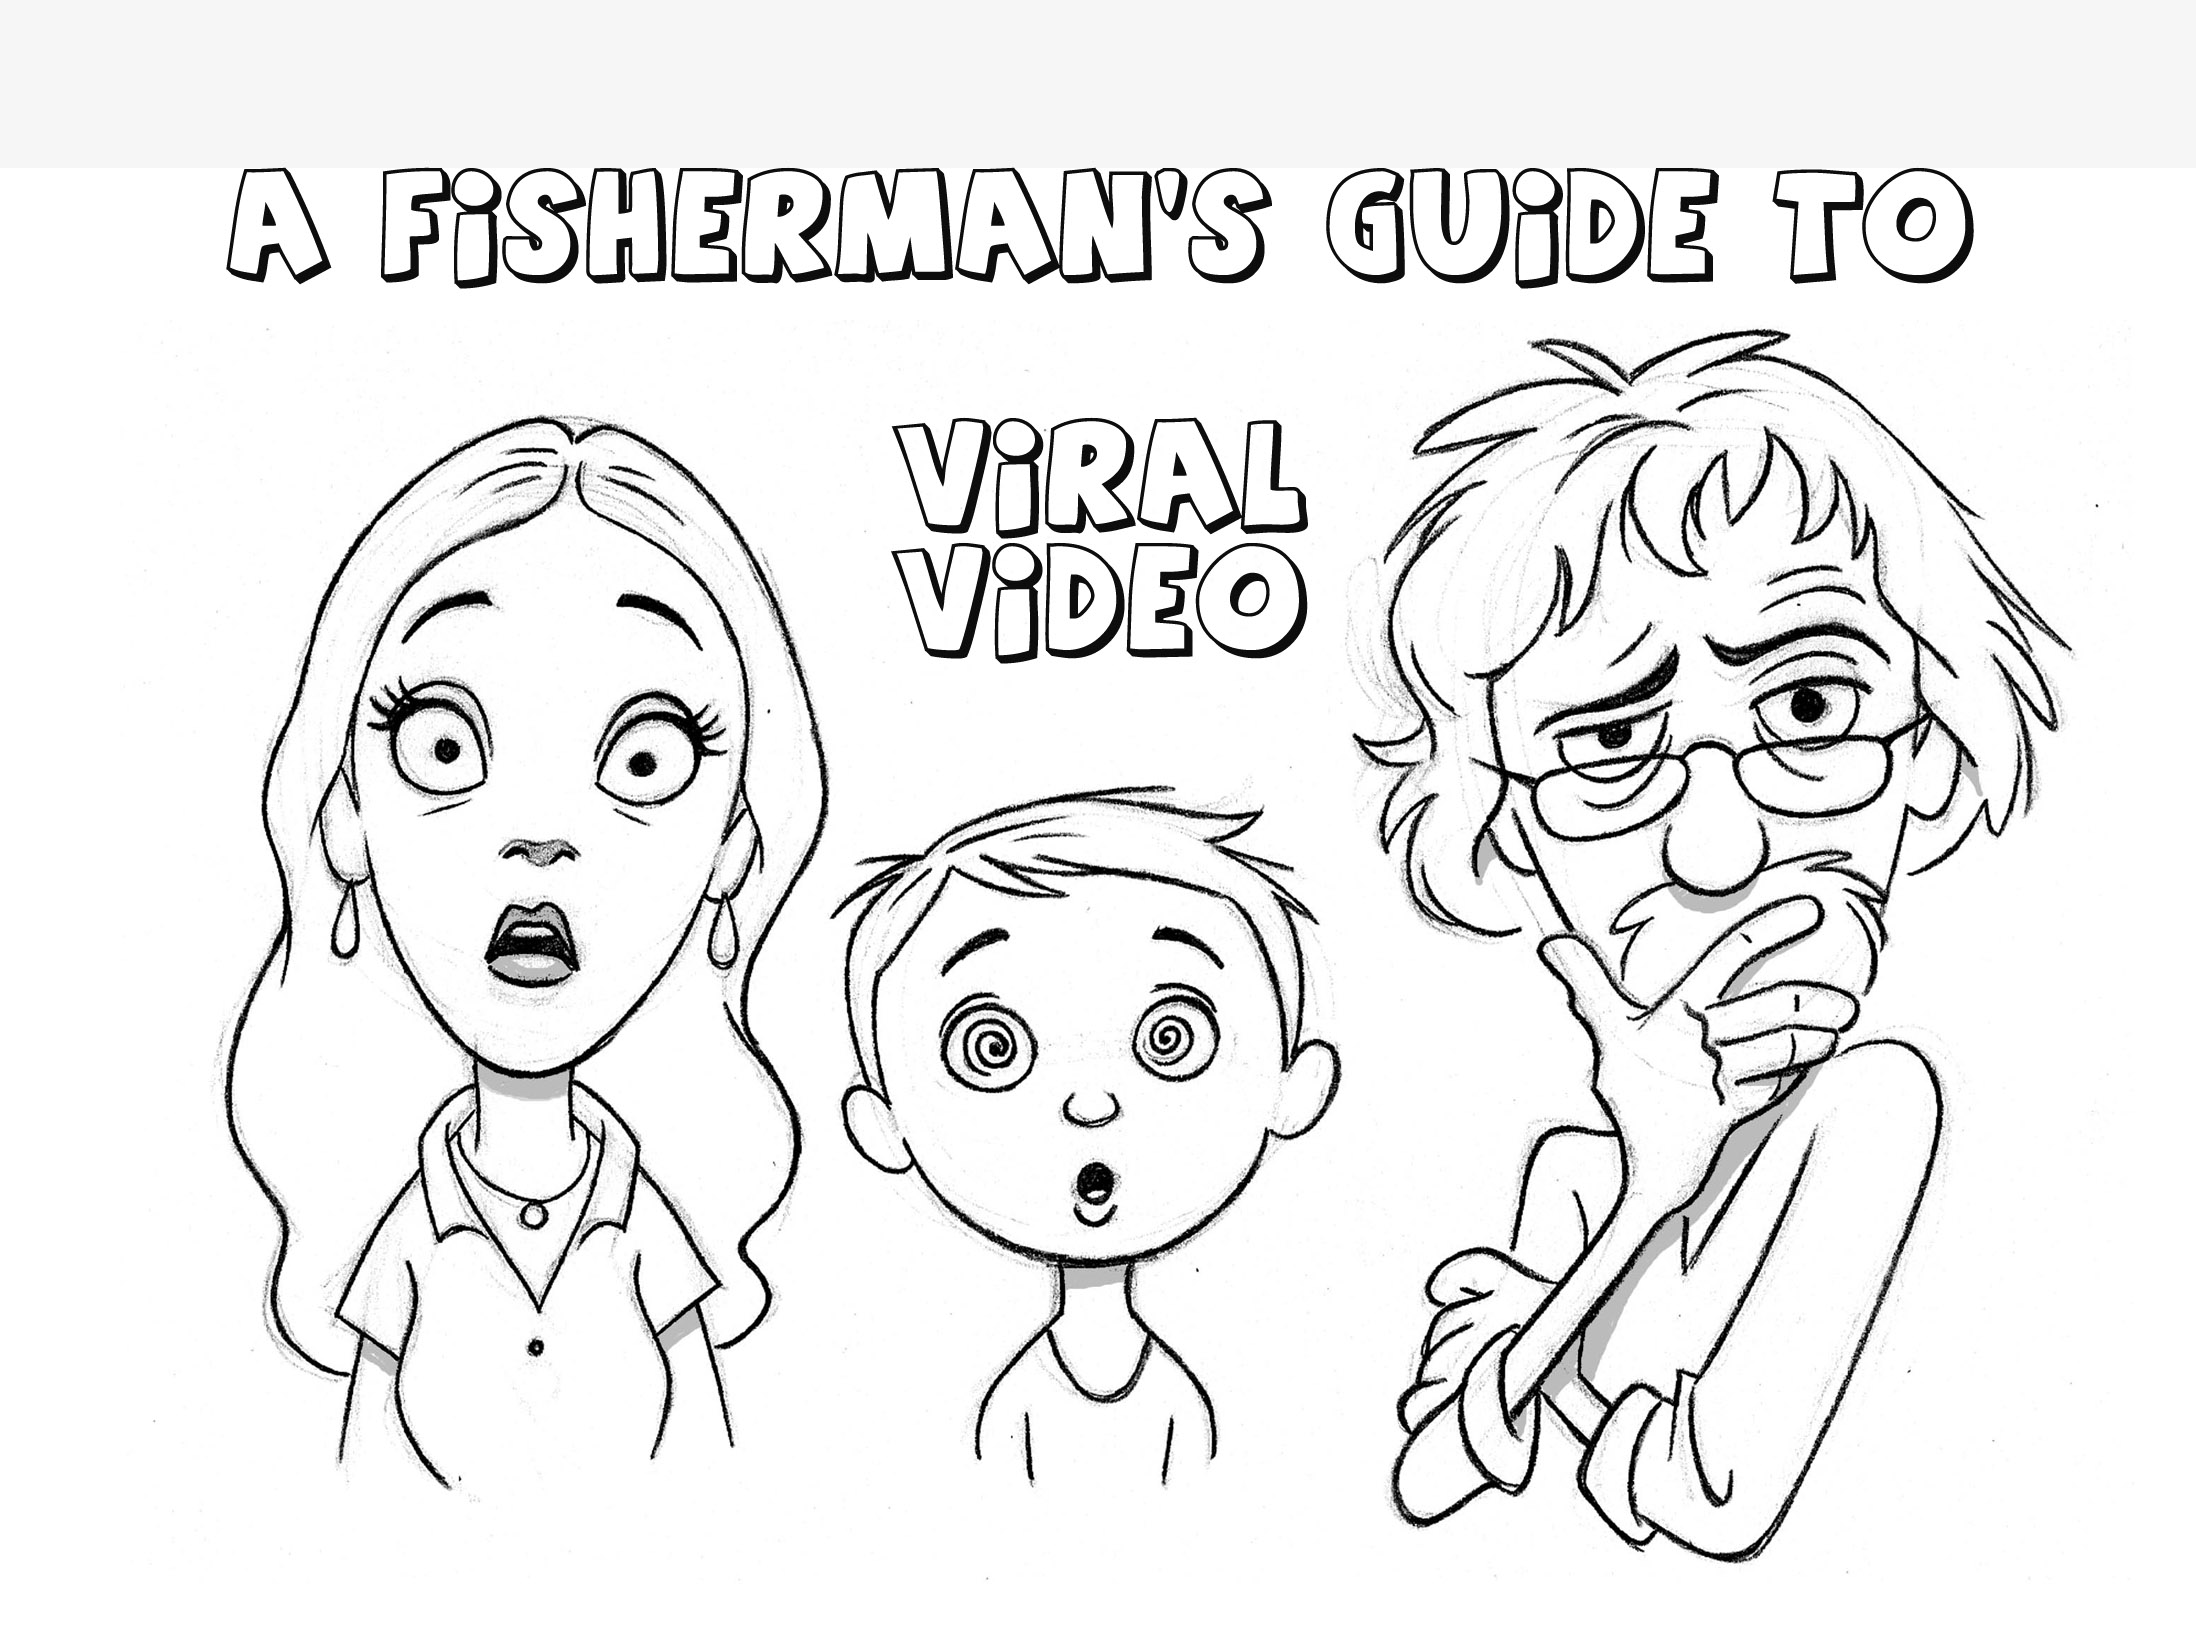 Viral Videos: A Fisherman’s Guide to Viral Video